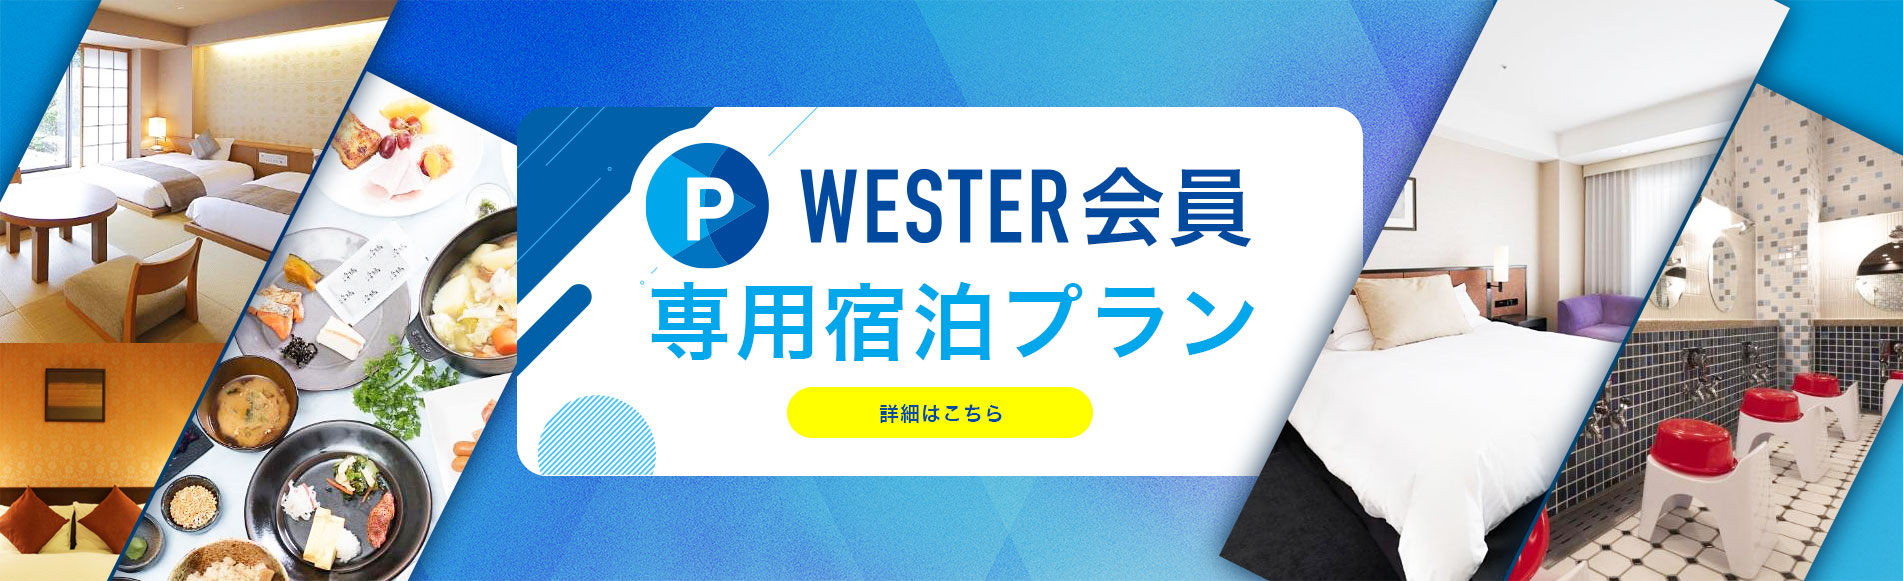 WESTER会員専用宿泊プラン